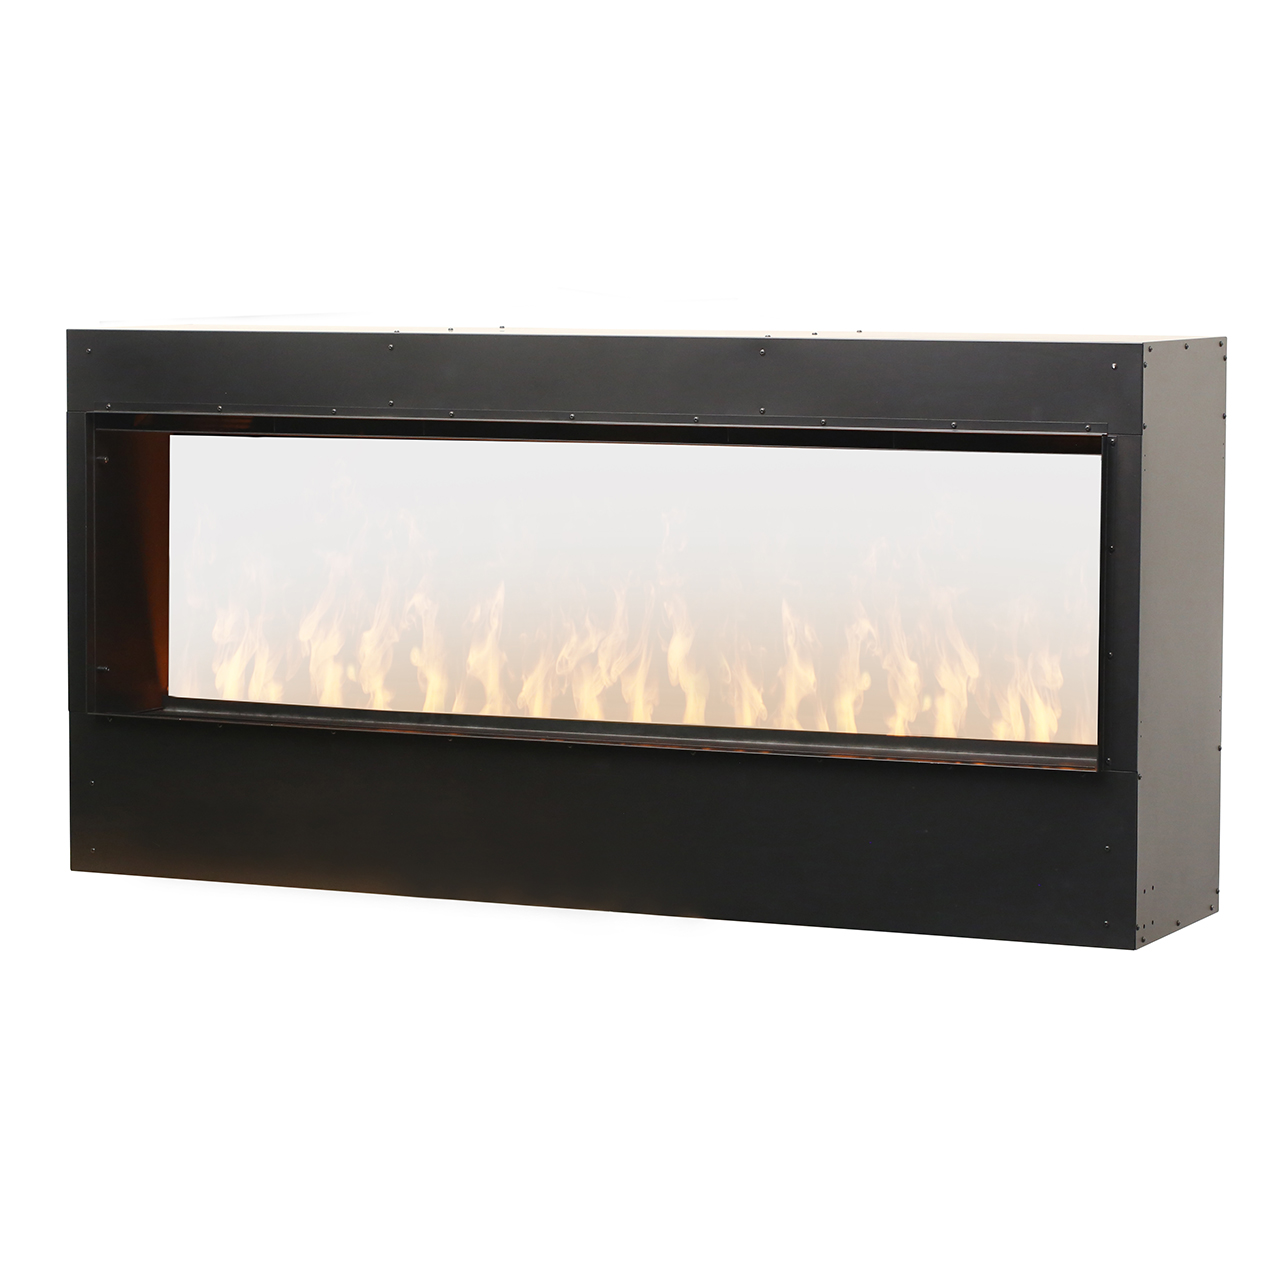 DIMPLEX CDFI-BX1500 SEE-THROUGH BUILT-IN OPTI-MYST ELECTRIC FIREPLACE